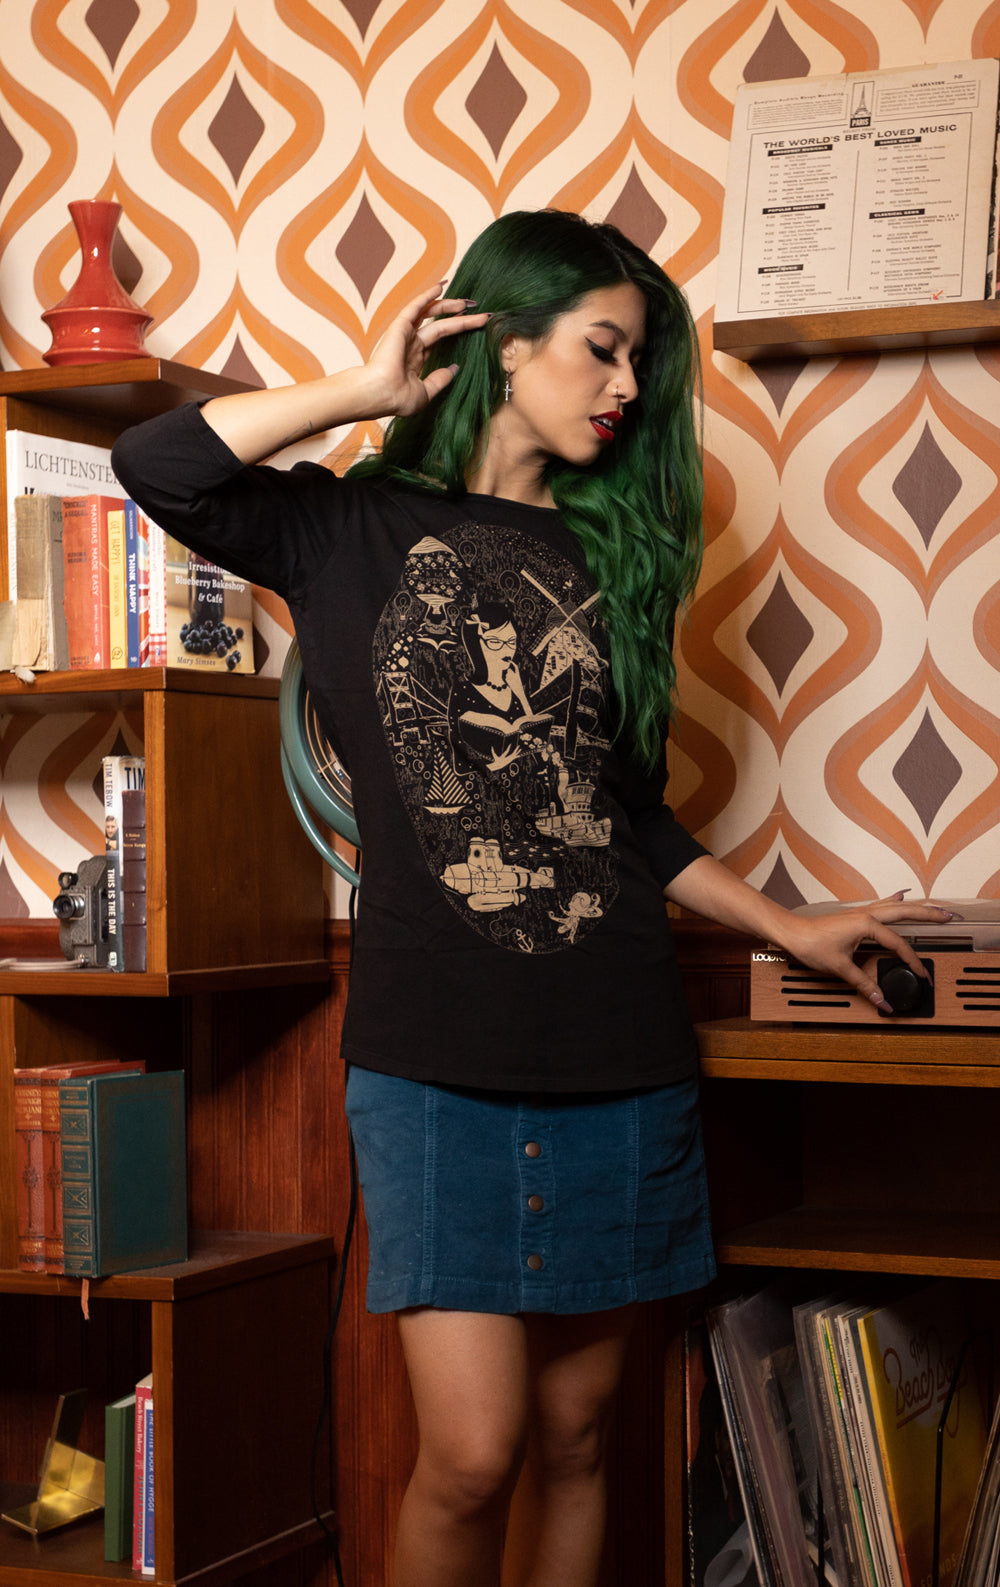 Model in black 3/4 sleeve tee featuring a smart girl reading a book amidst imaginary images